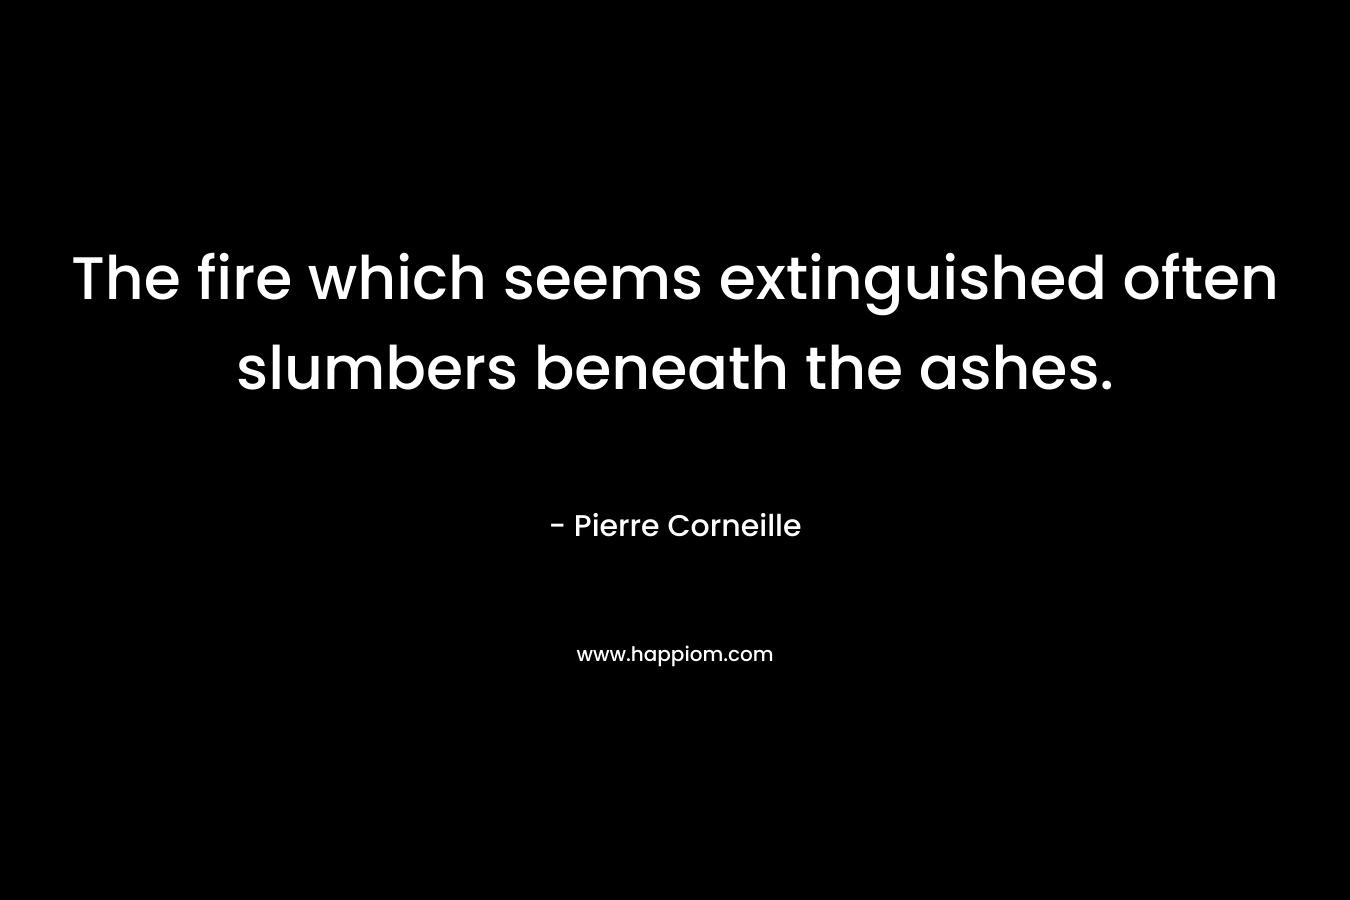 The fire which seems extinguished often slumbers beneath the ashes. – Pierre Corneille